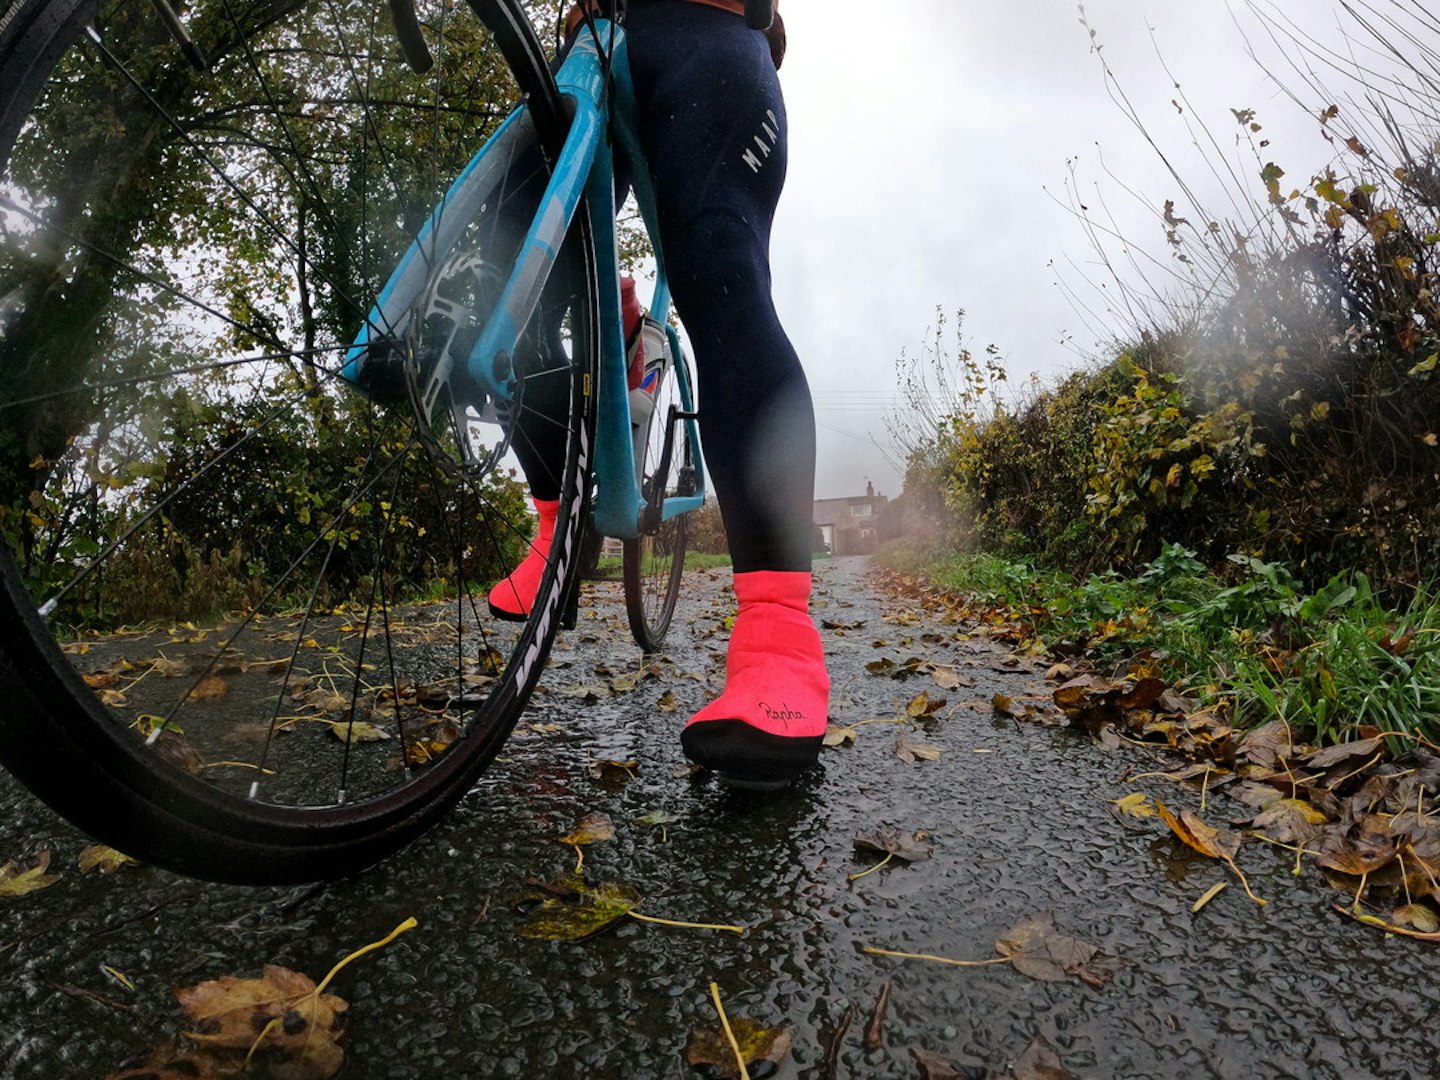 Rapha Winter Overshoes in use